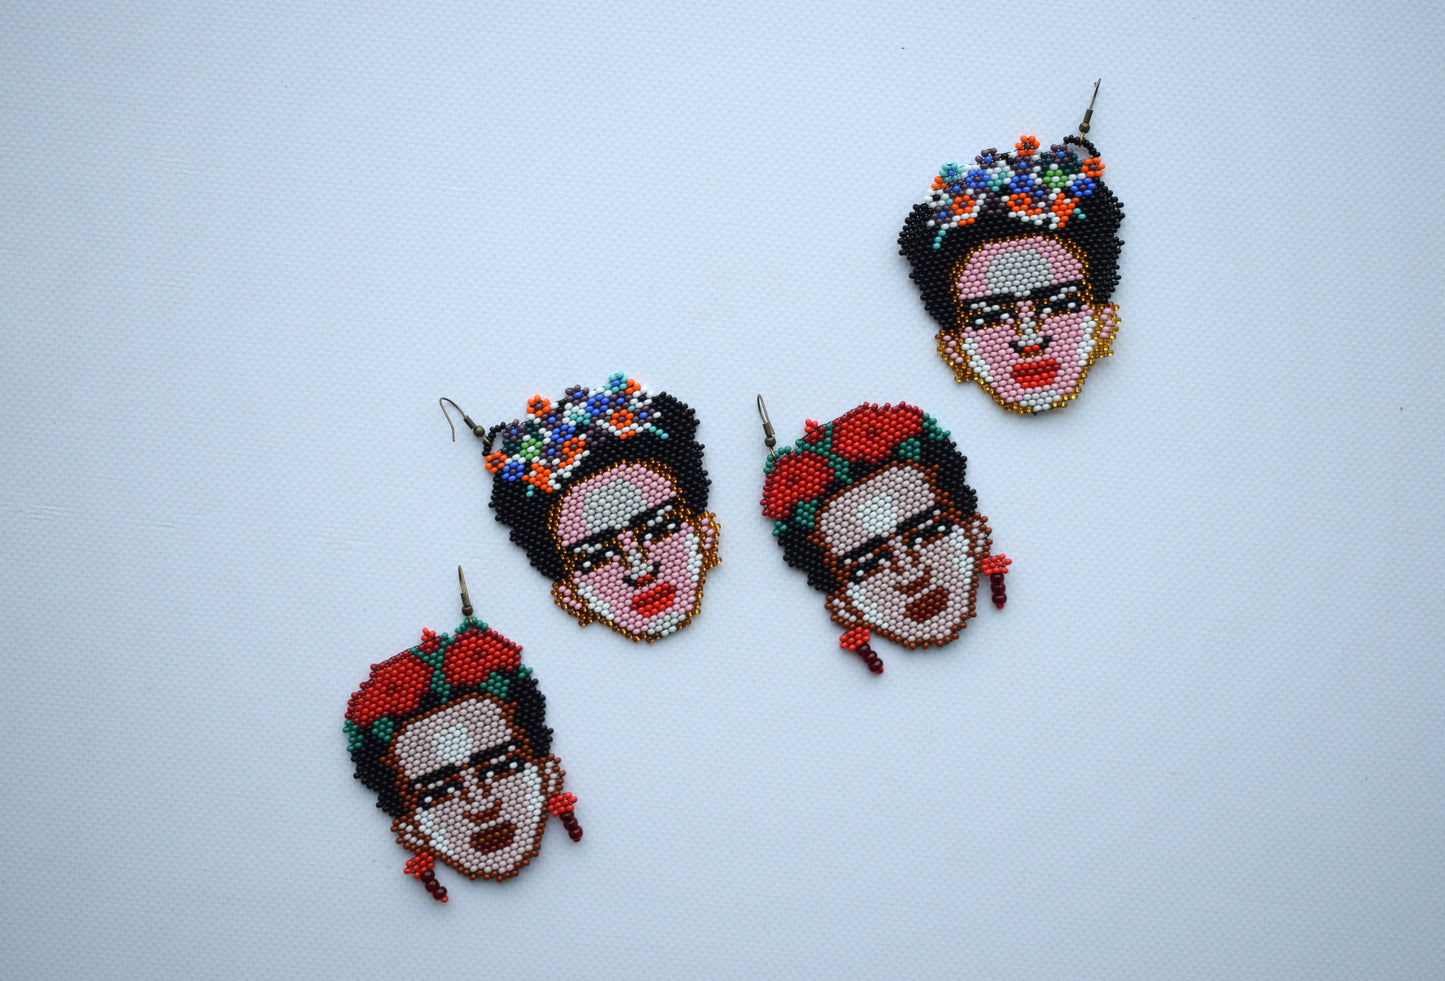 These are beaded earrings Frida Kahlo. These beaded earrings are made of high-quality Czech beads. These earrings are colorful, fashionable and highly versatile, suitable for everyday wear. Completely handmade❤️  Length (*with hooks) - approx. 7 cm (2.7 inches). Width - approx. 5.5 cm (2.1 inches).  If you have any questions just write me a message. I am always in touch and reply asap!